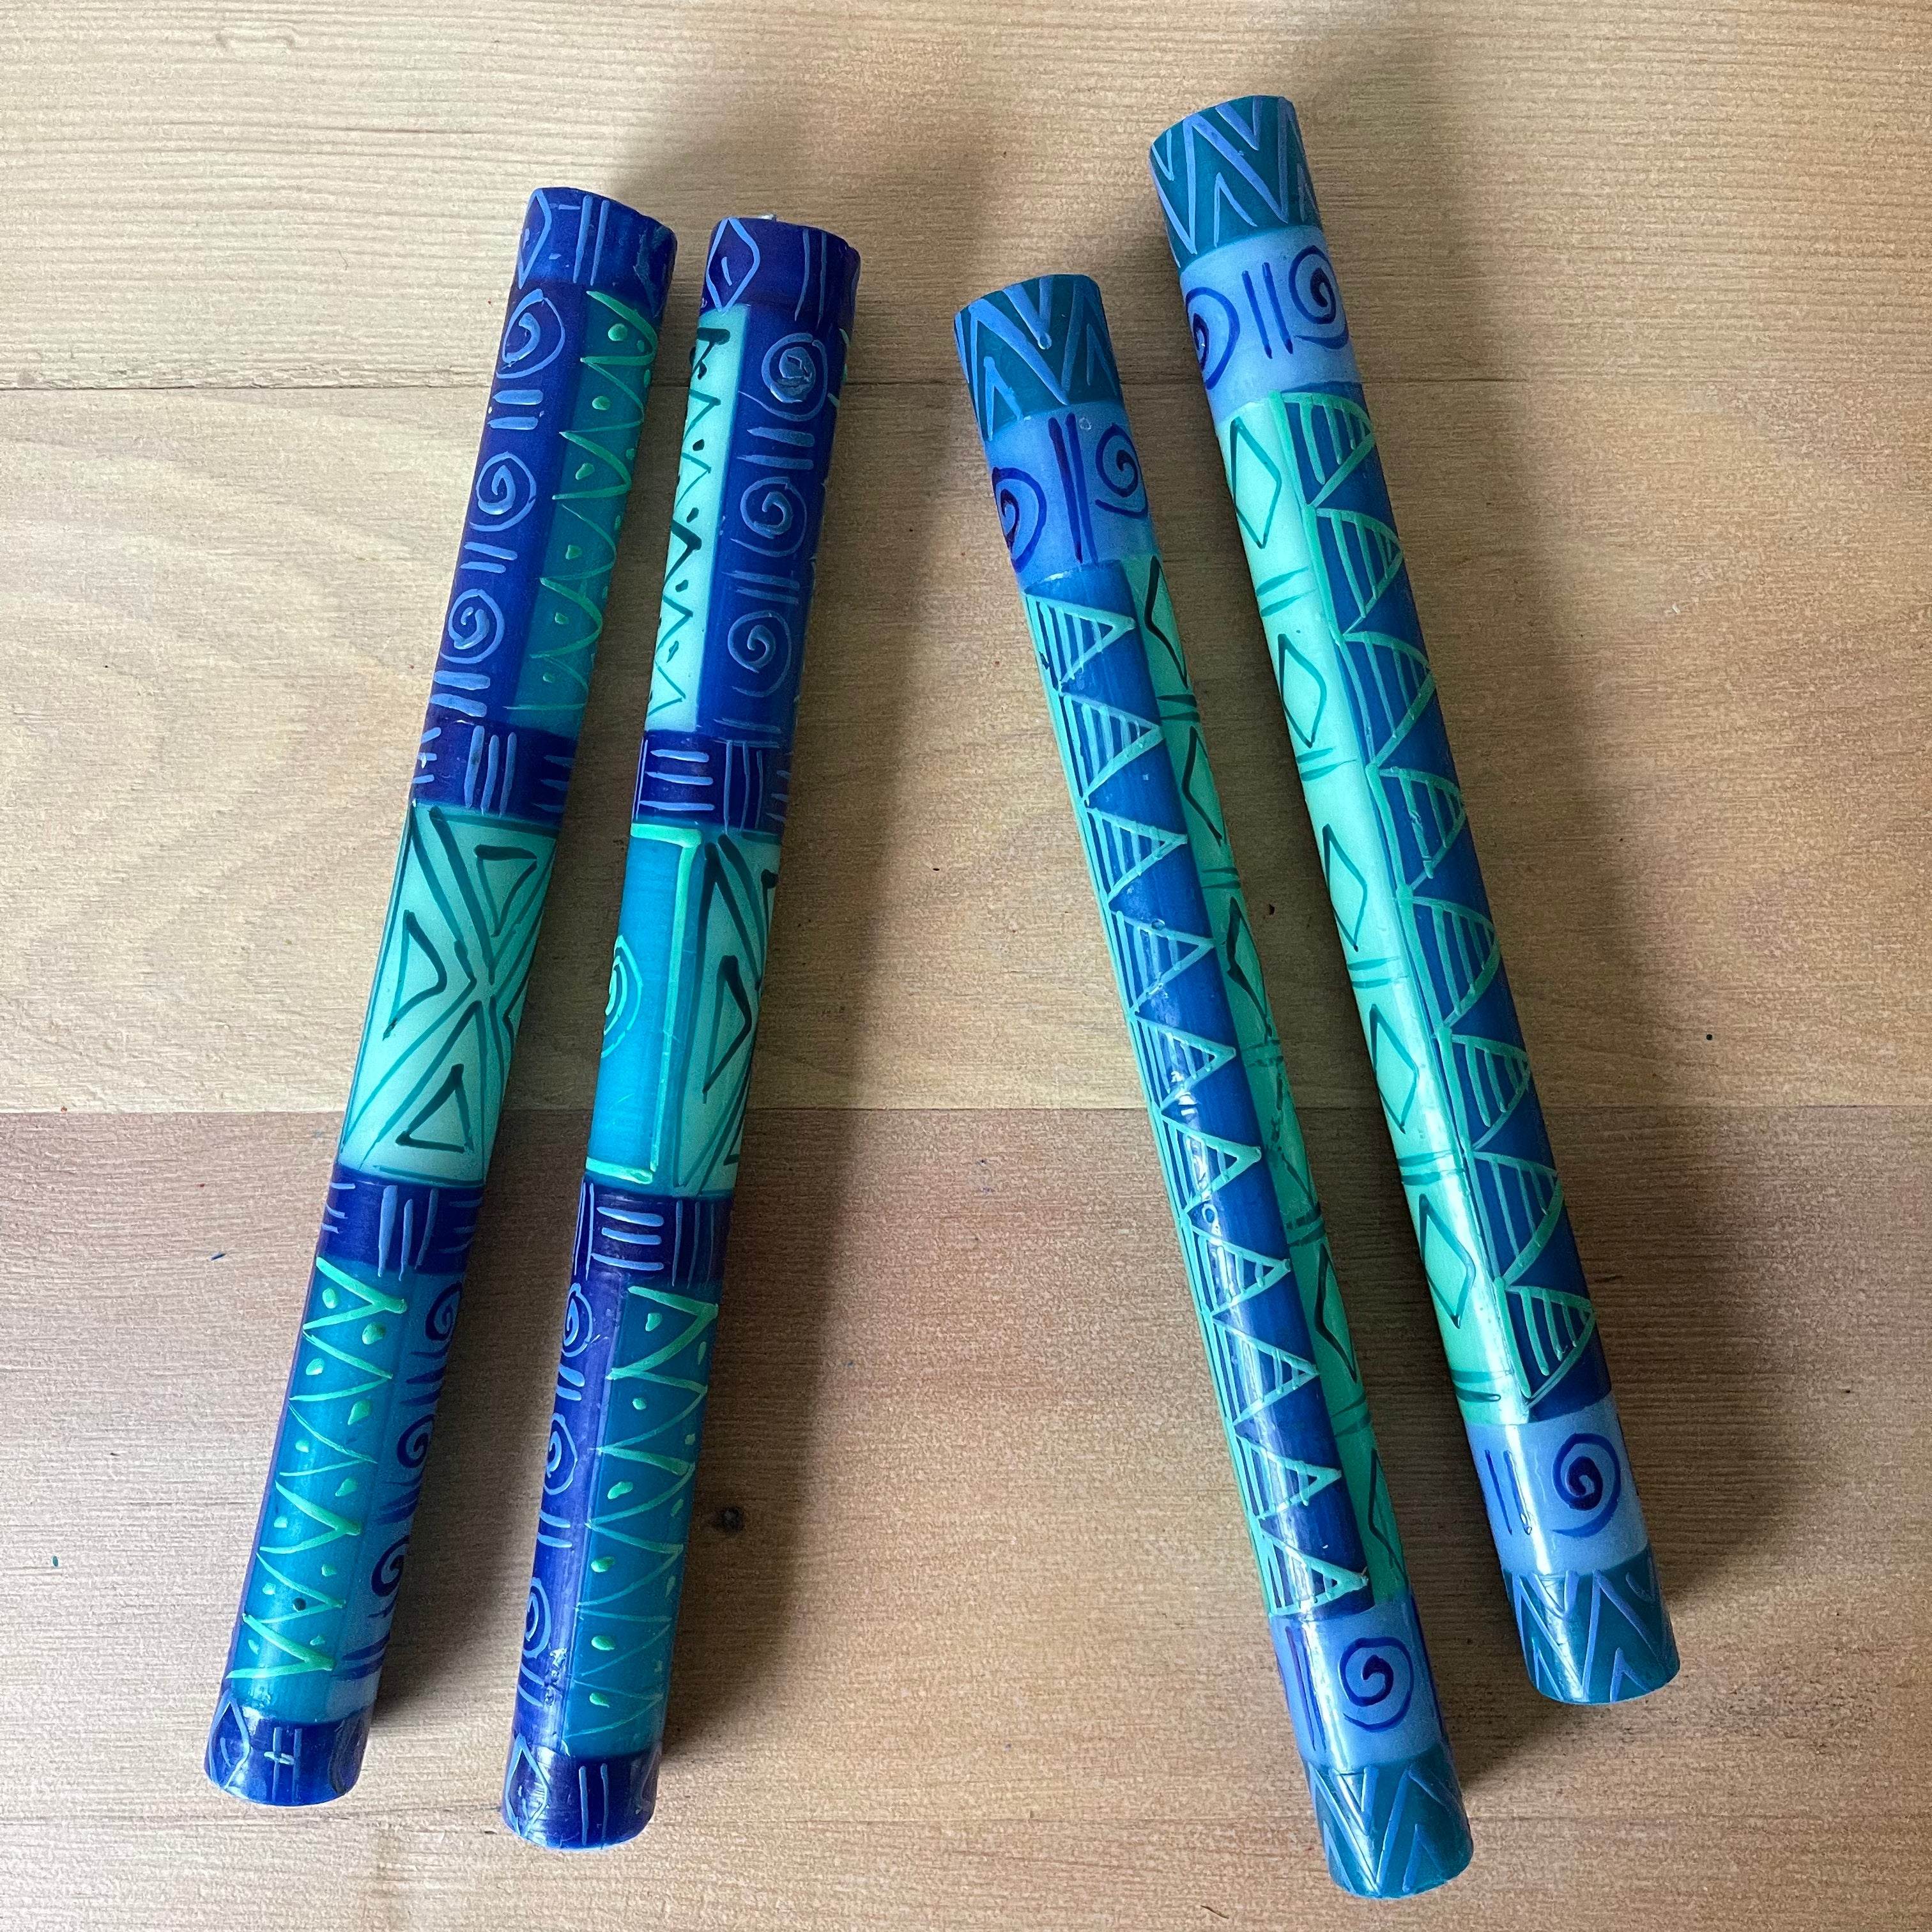 Two Blue & Green taper pairs showing two different blue & green patterns, but the candle pairs  come in a matched design.